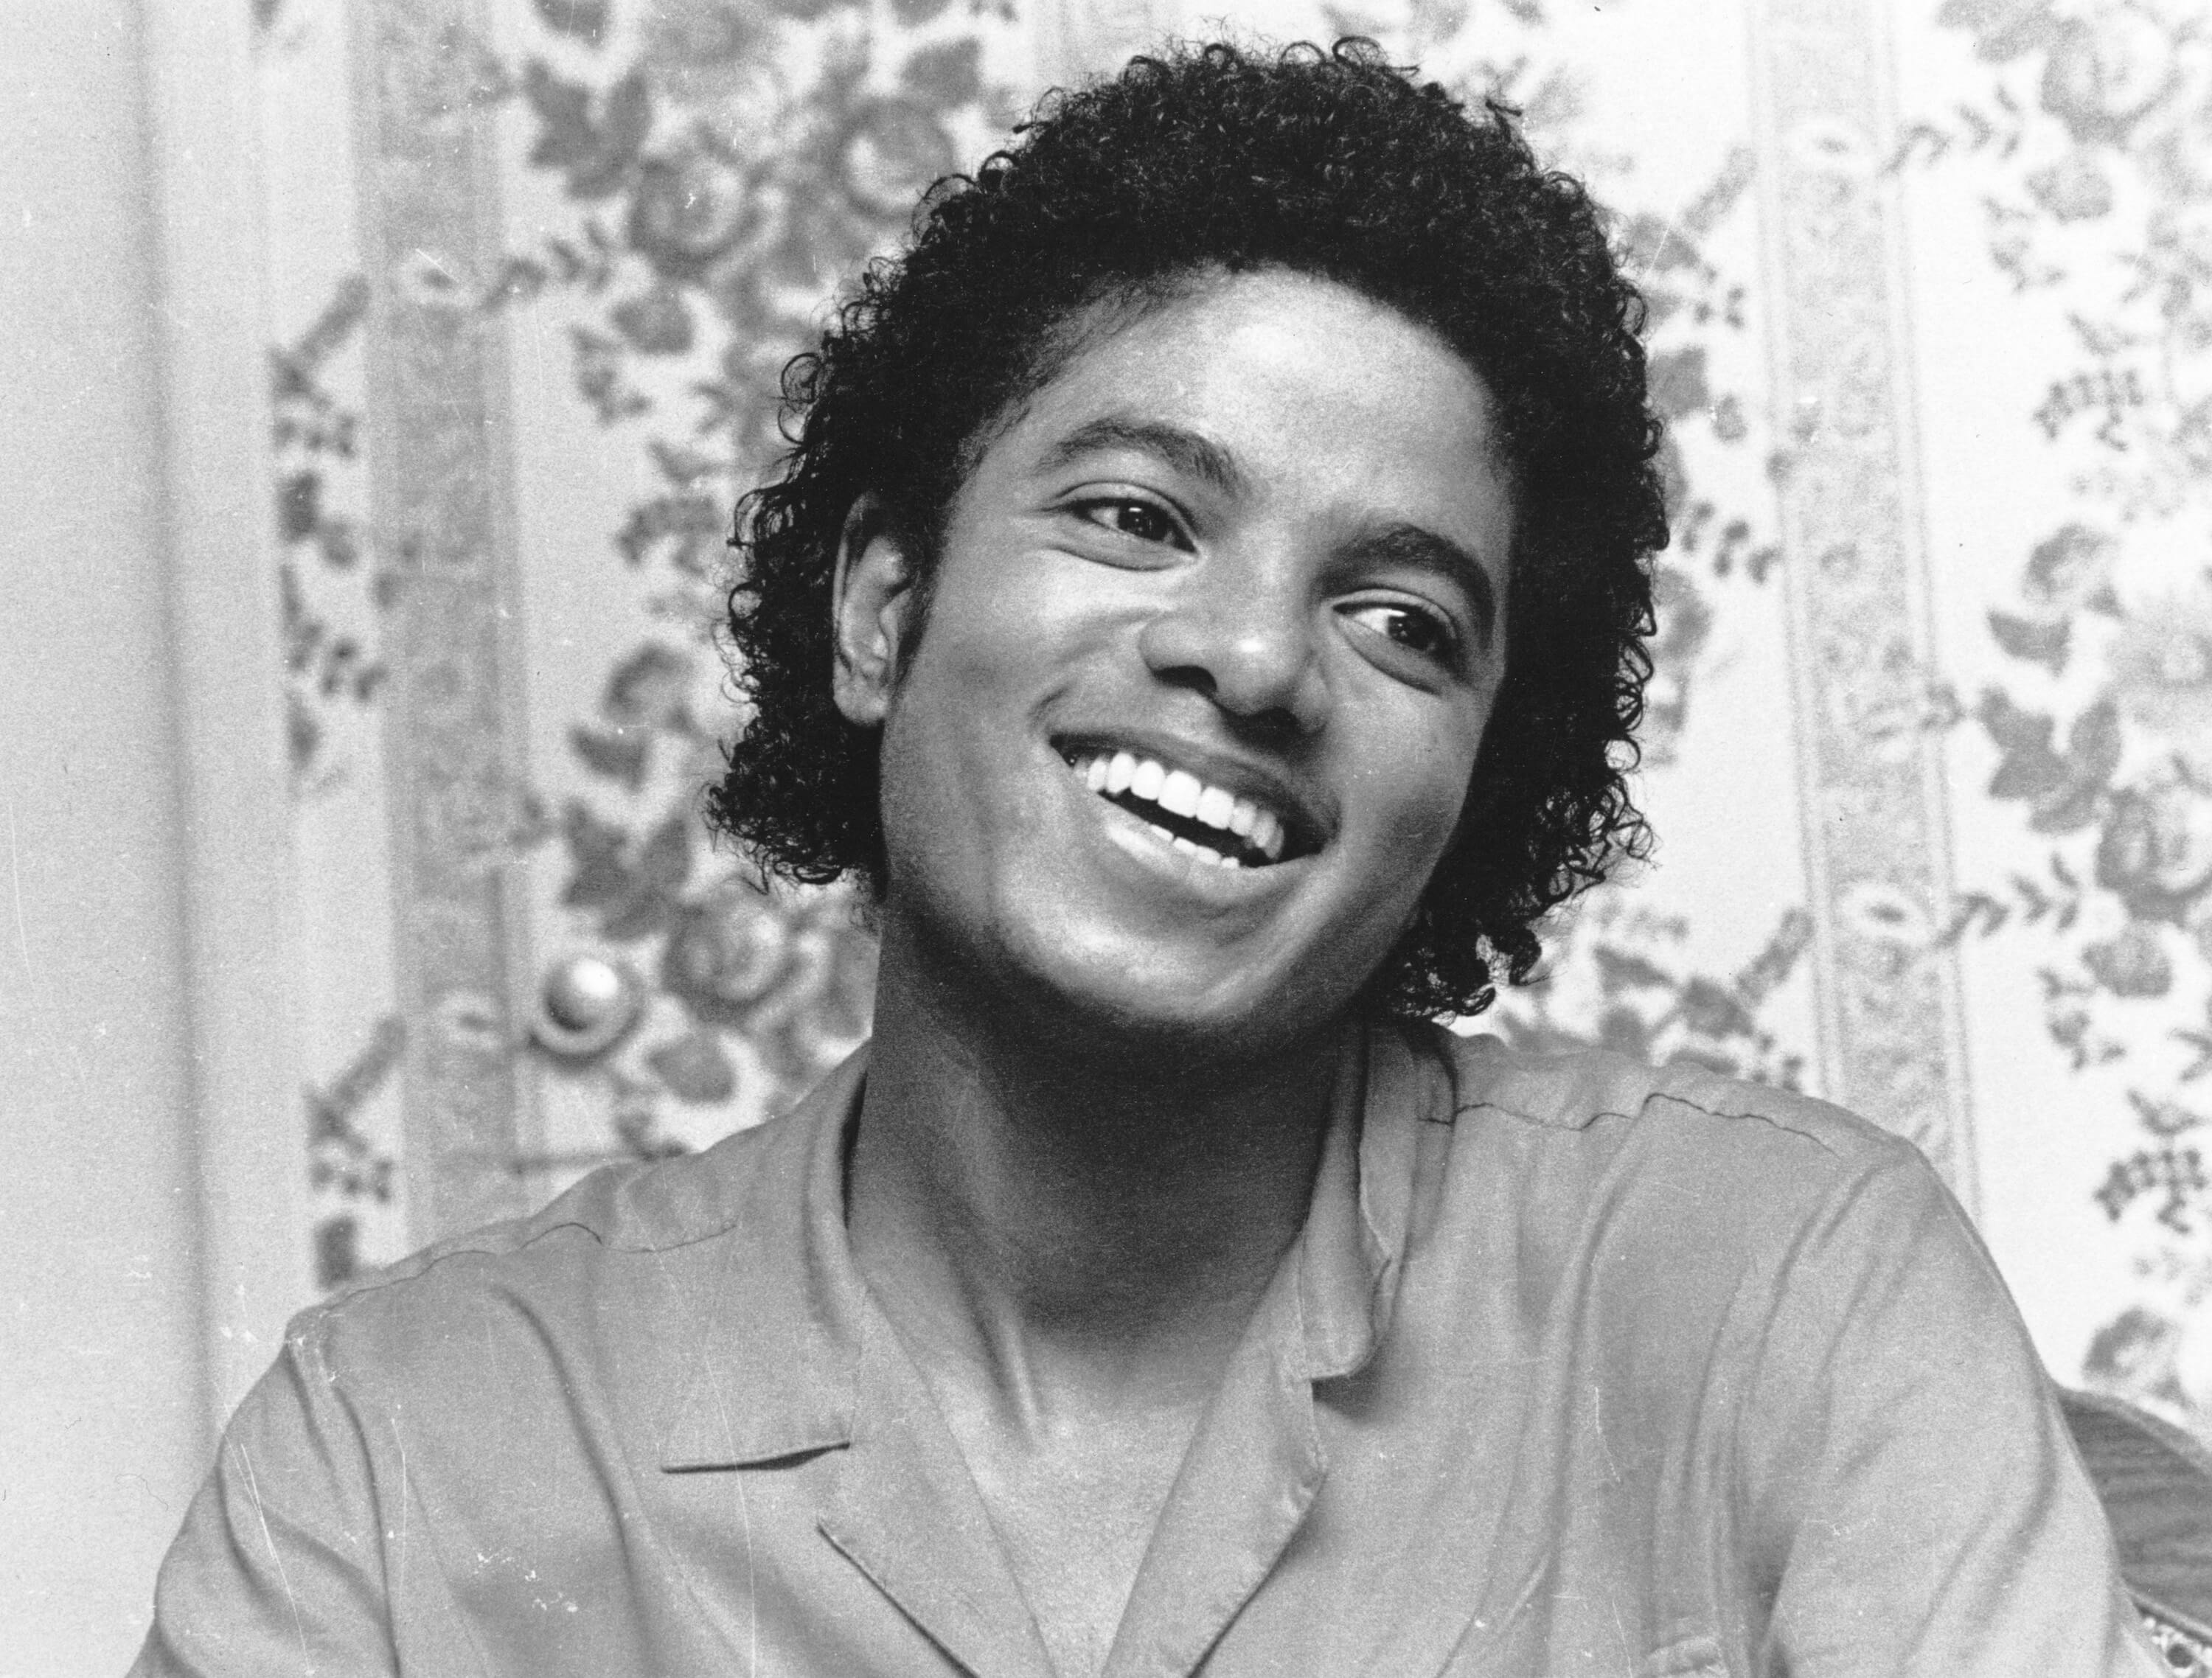 Michael Jackson's 'You Are Not Alone': This Week's Billboard Chart